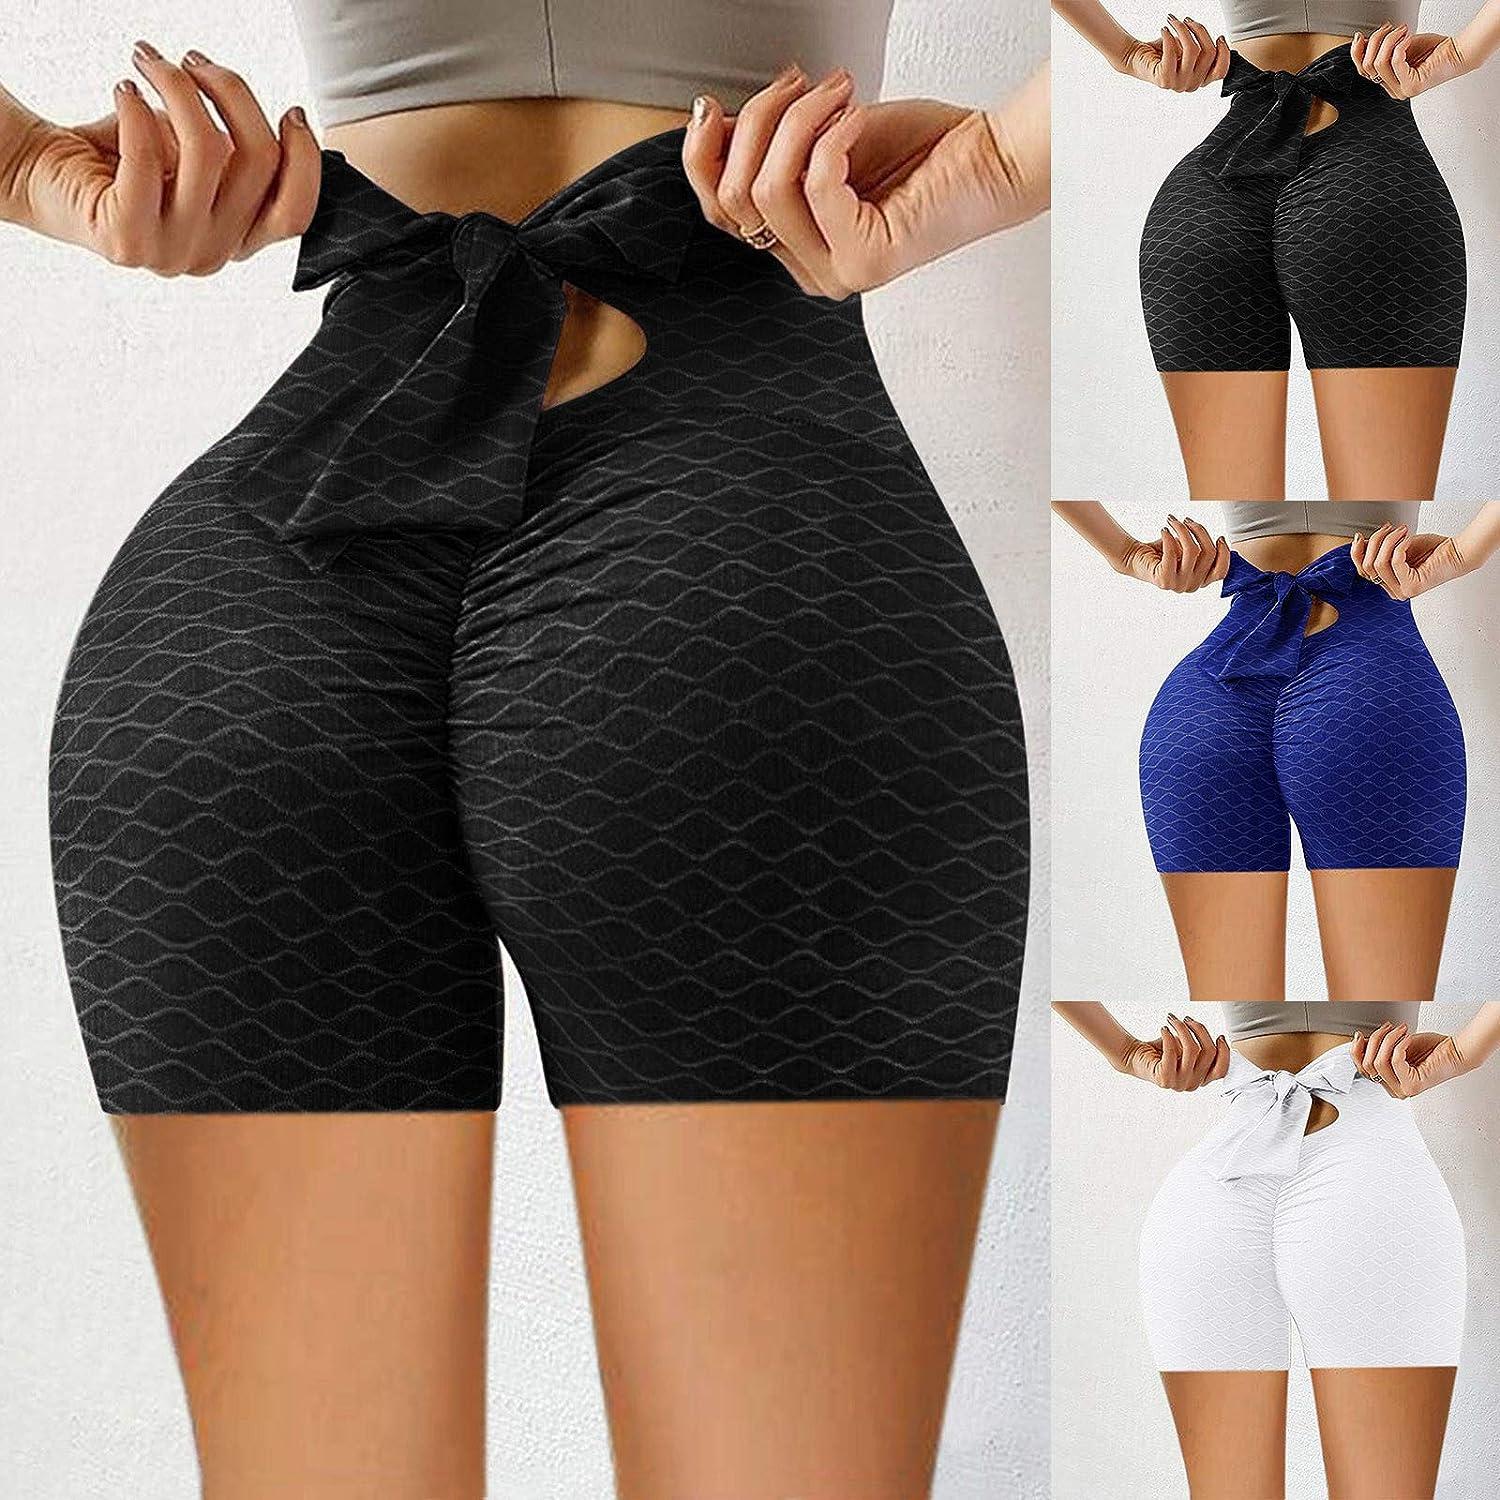 Ladies Workout Pants and Shorts